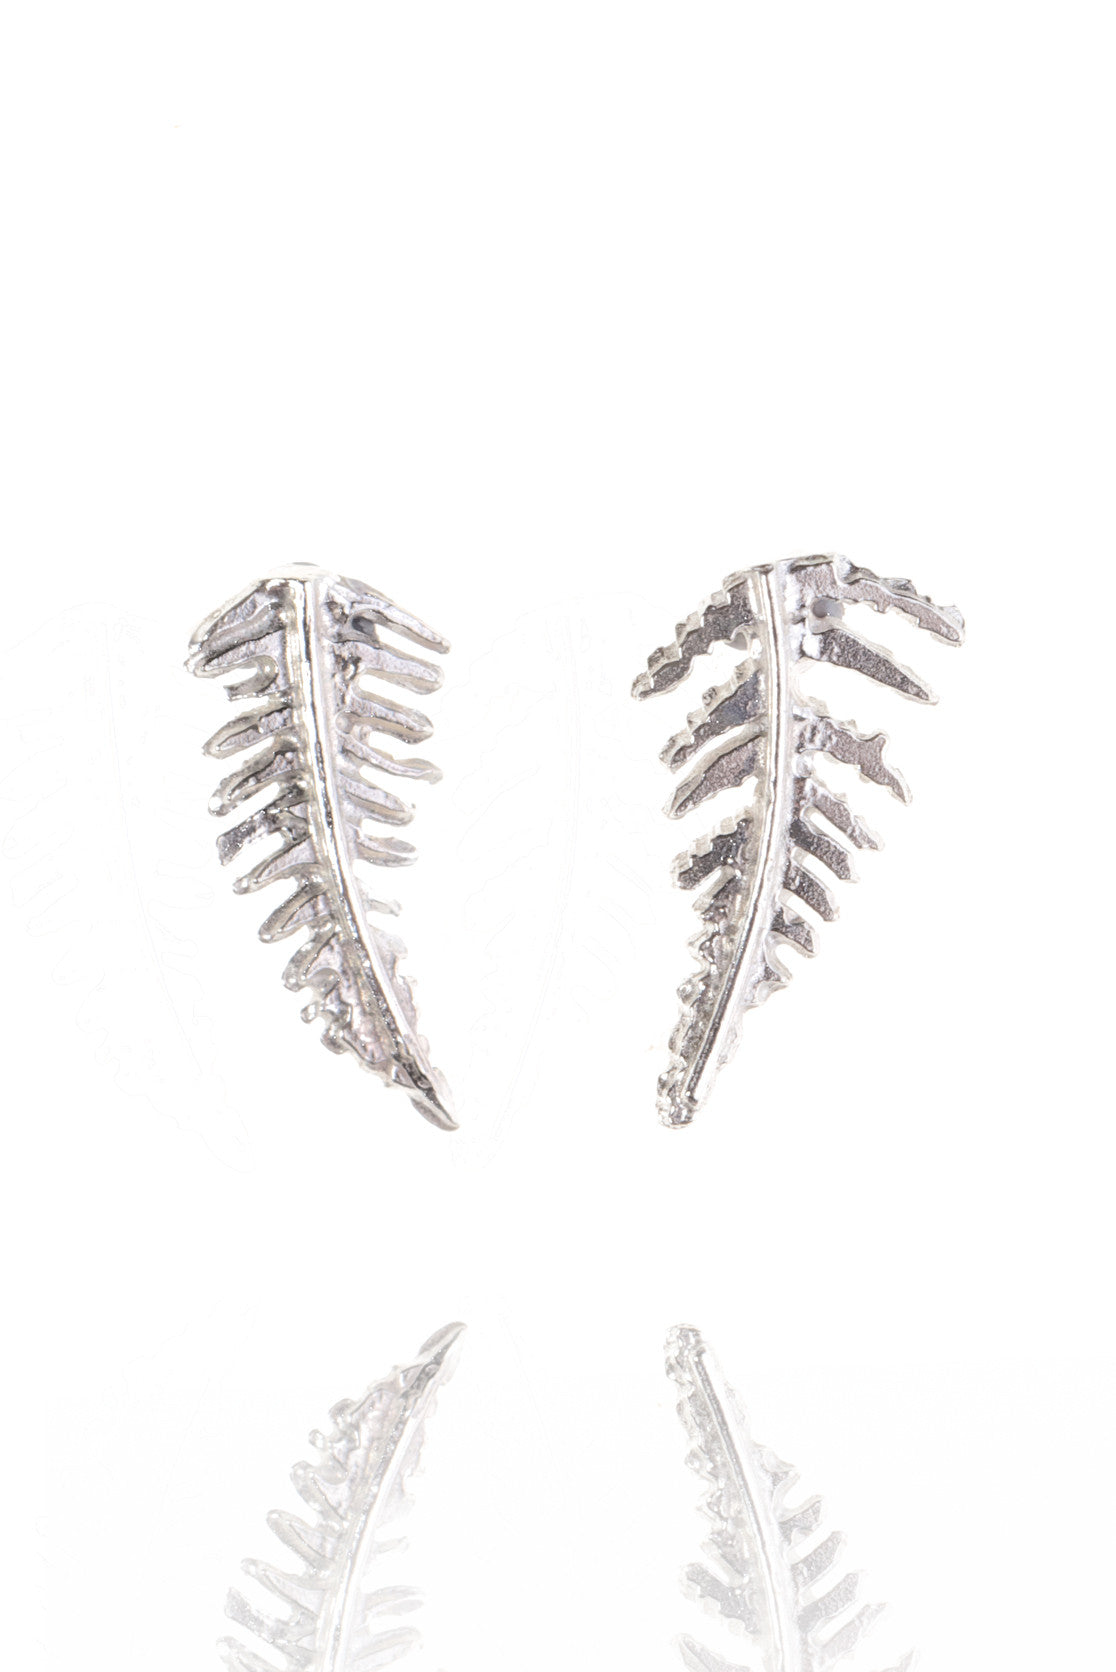 Botanical Fern Stud Earrings in Sterling Silver and Gold Vermeil